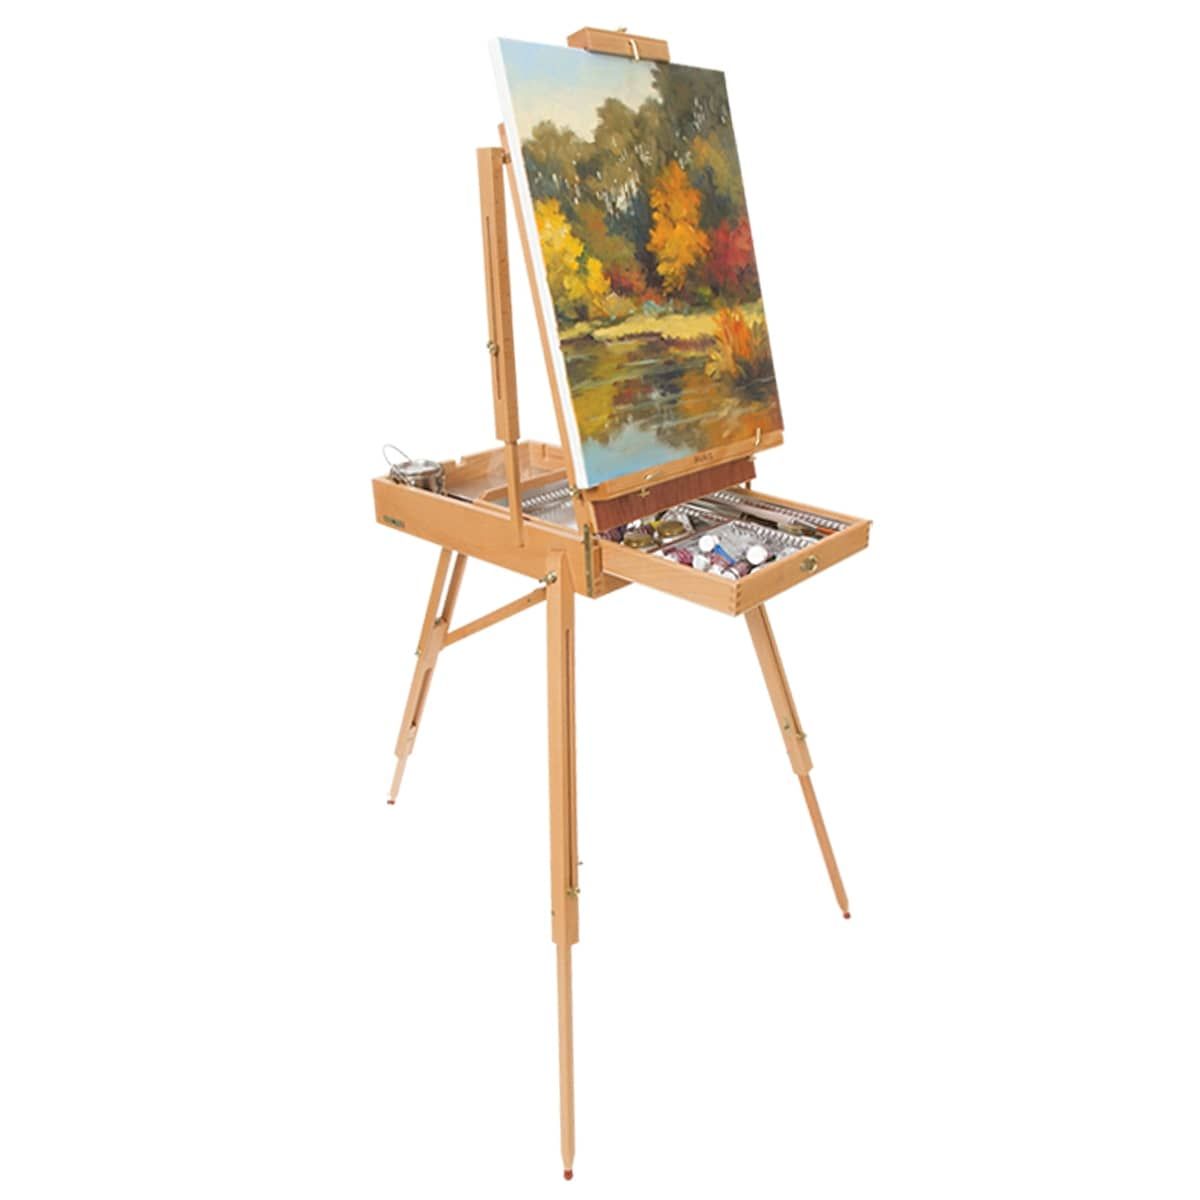 Made of Matte Black Pinewood Includes Divided Sketch Drawer for Supplies Art Supplies for Beginner & Advanced Painters. French Easel Frida Full-Sized French Easel Shoulder Strap & Aluminum Legs Metal Canvas Holder DeSerres 32 in 